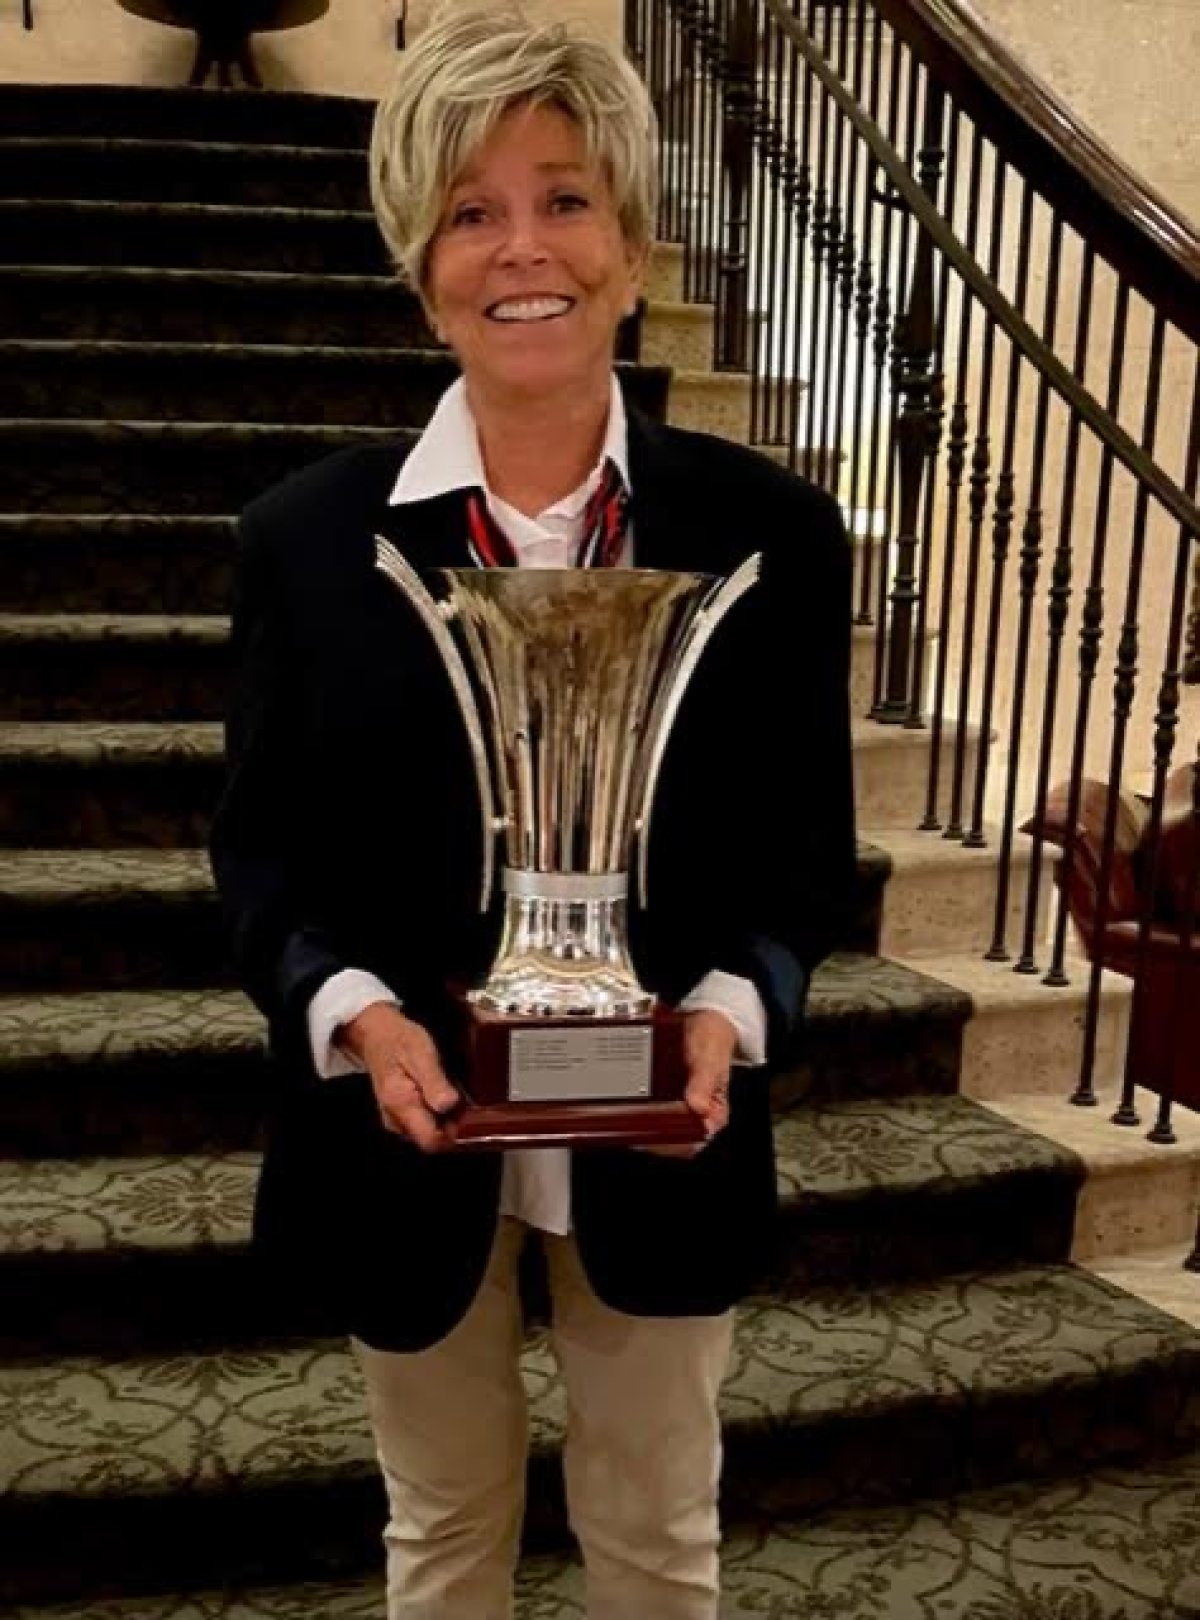 Rancho Santa Fe resident Linda Port displays the trophy her team won in the Vision Cup at TPC Sawgrass in Florida.